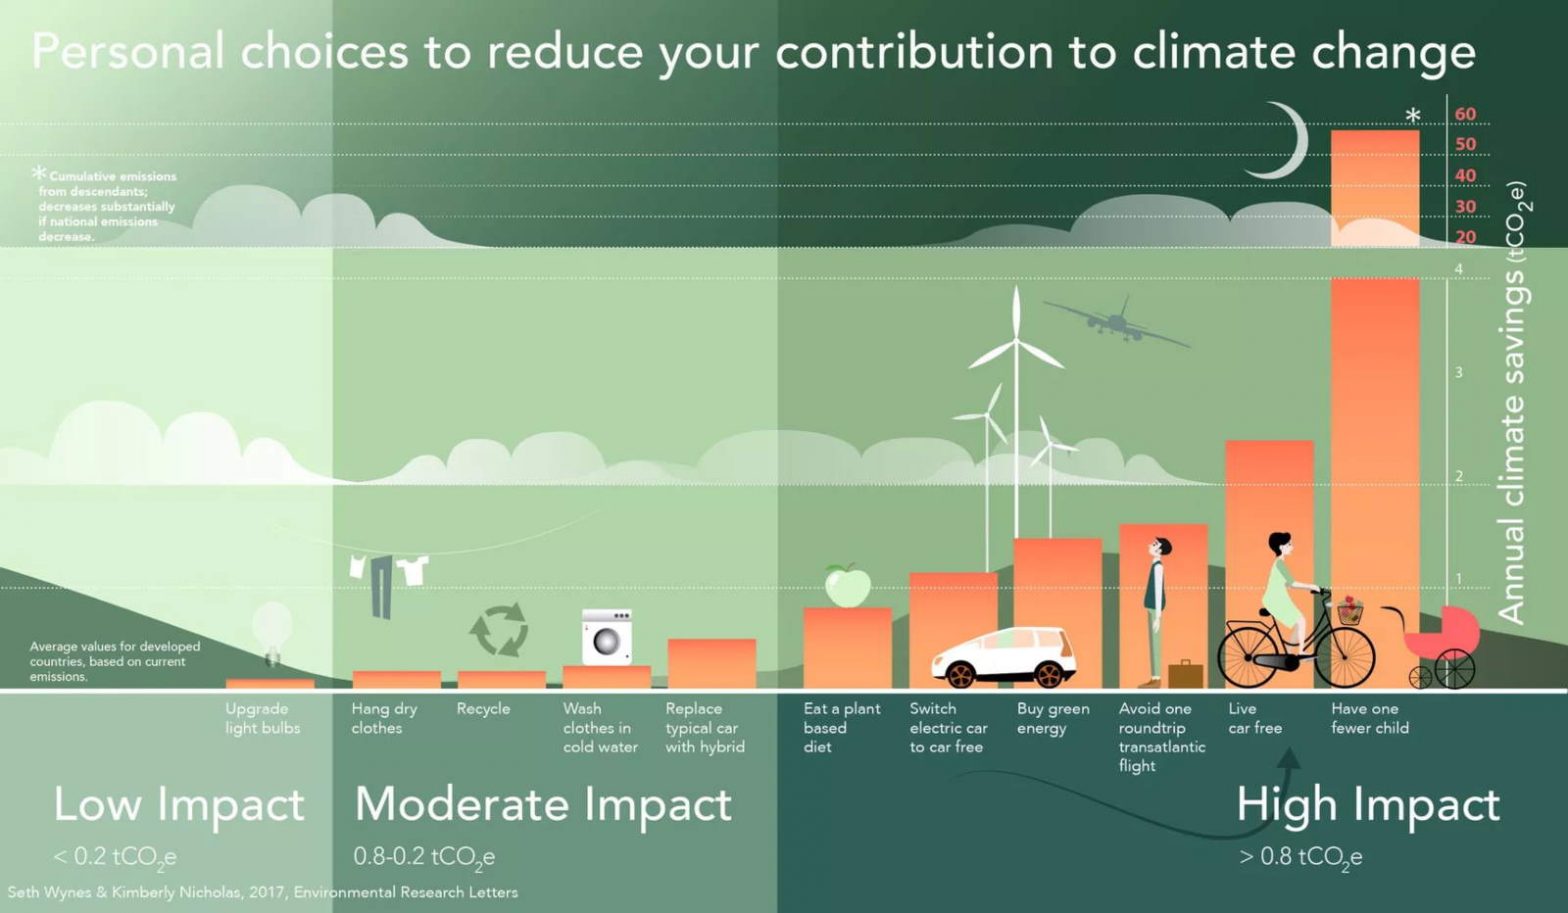 How your personal choices affect your contribution to climate change